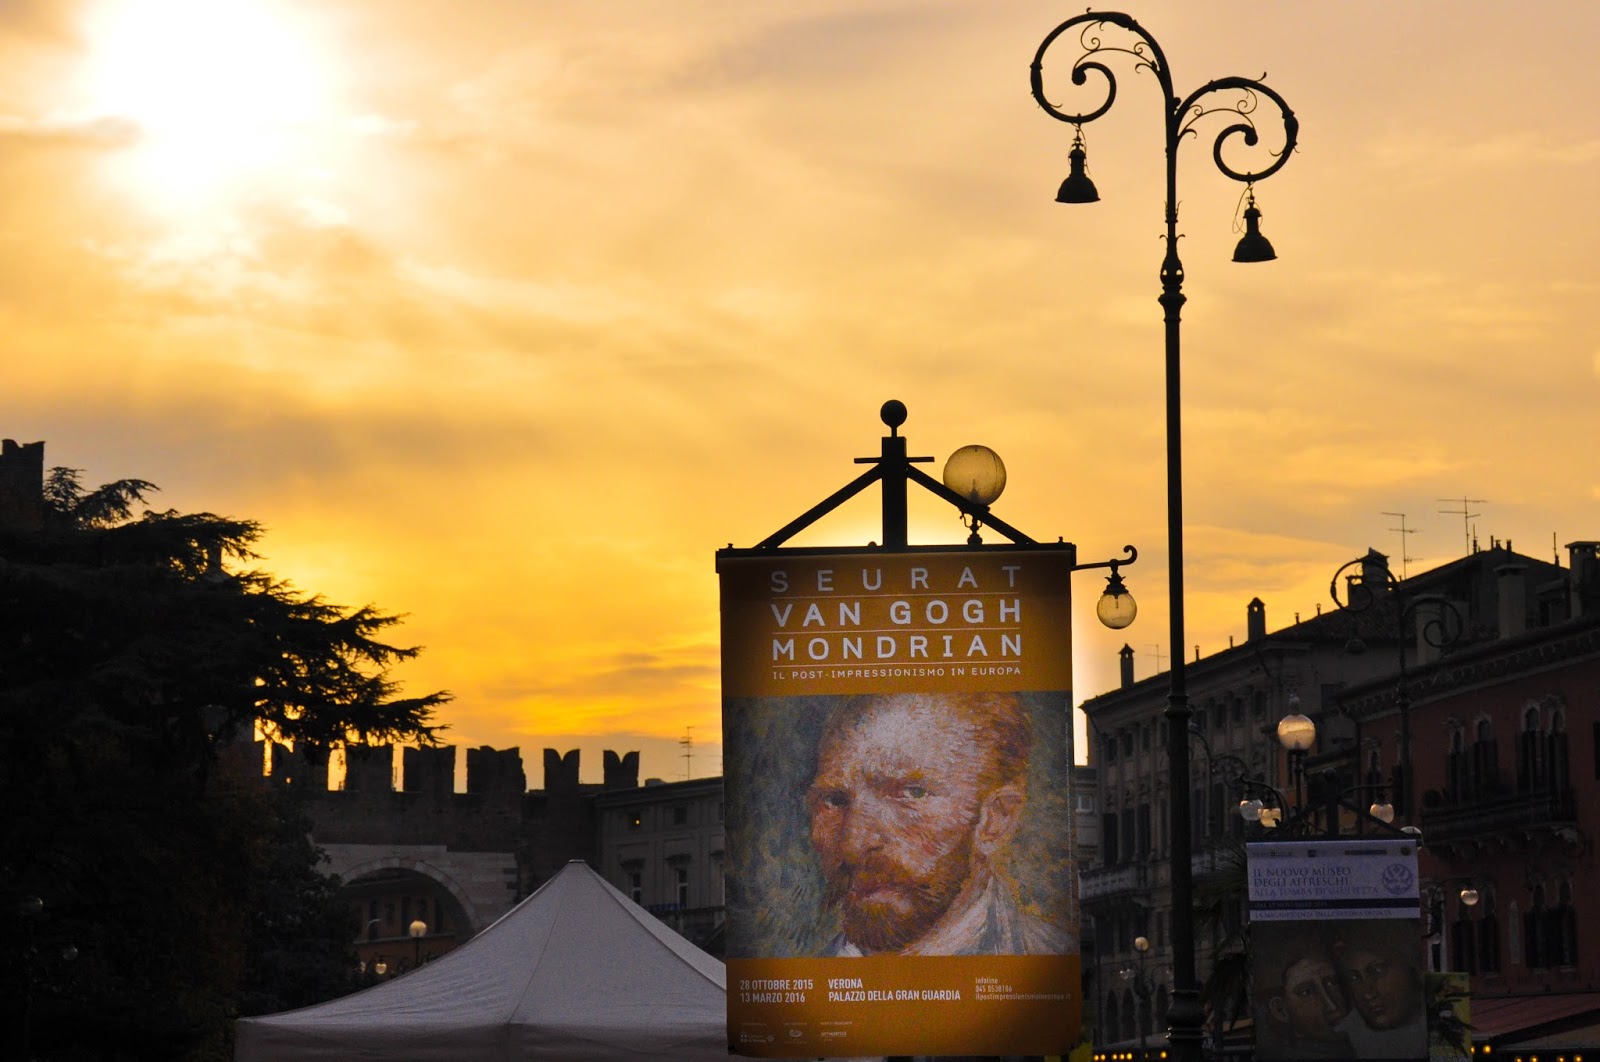 Under the impressionist sky; a poster for the Seurat, Van Gogh, Mondrian exhibition, Verona, Italy